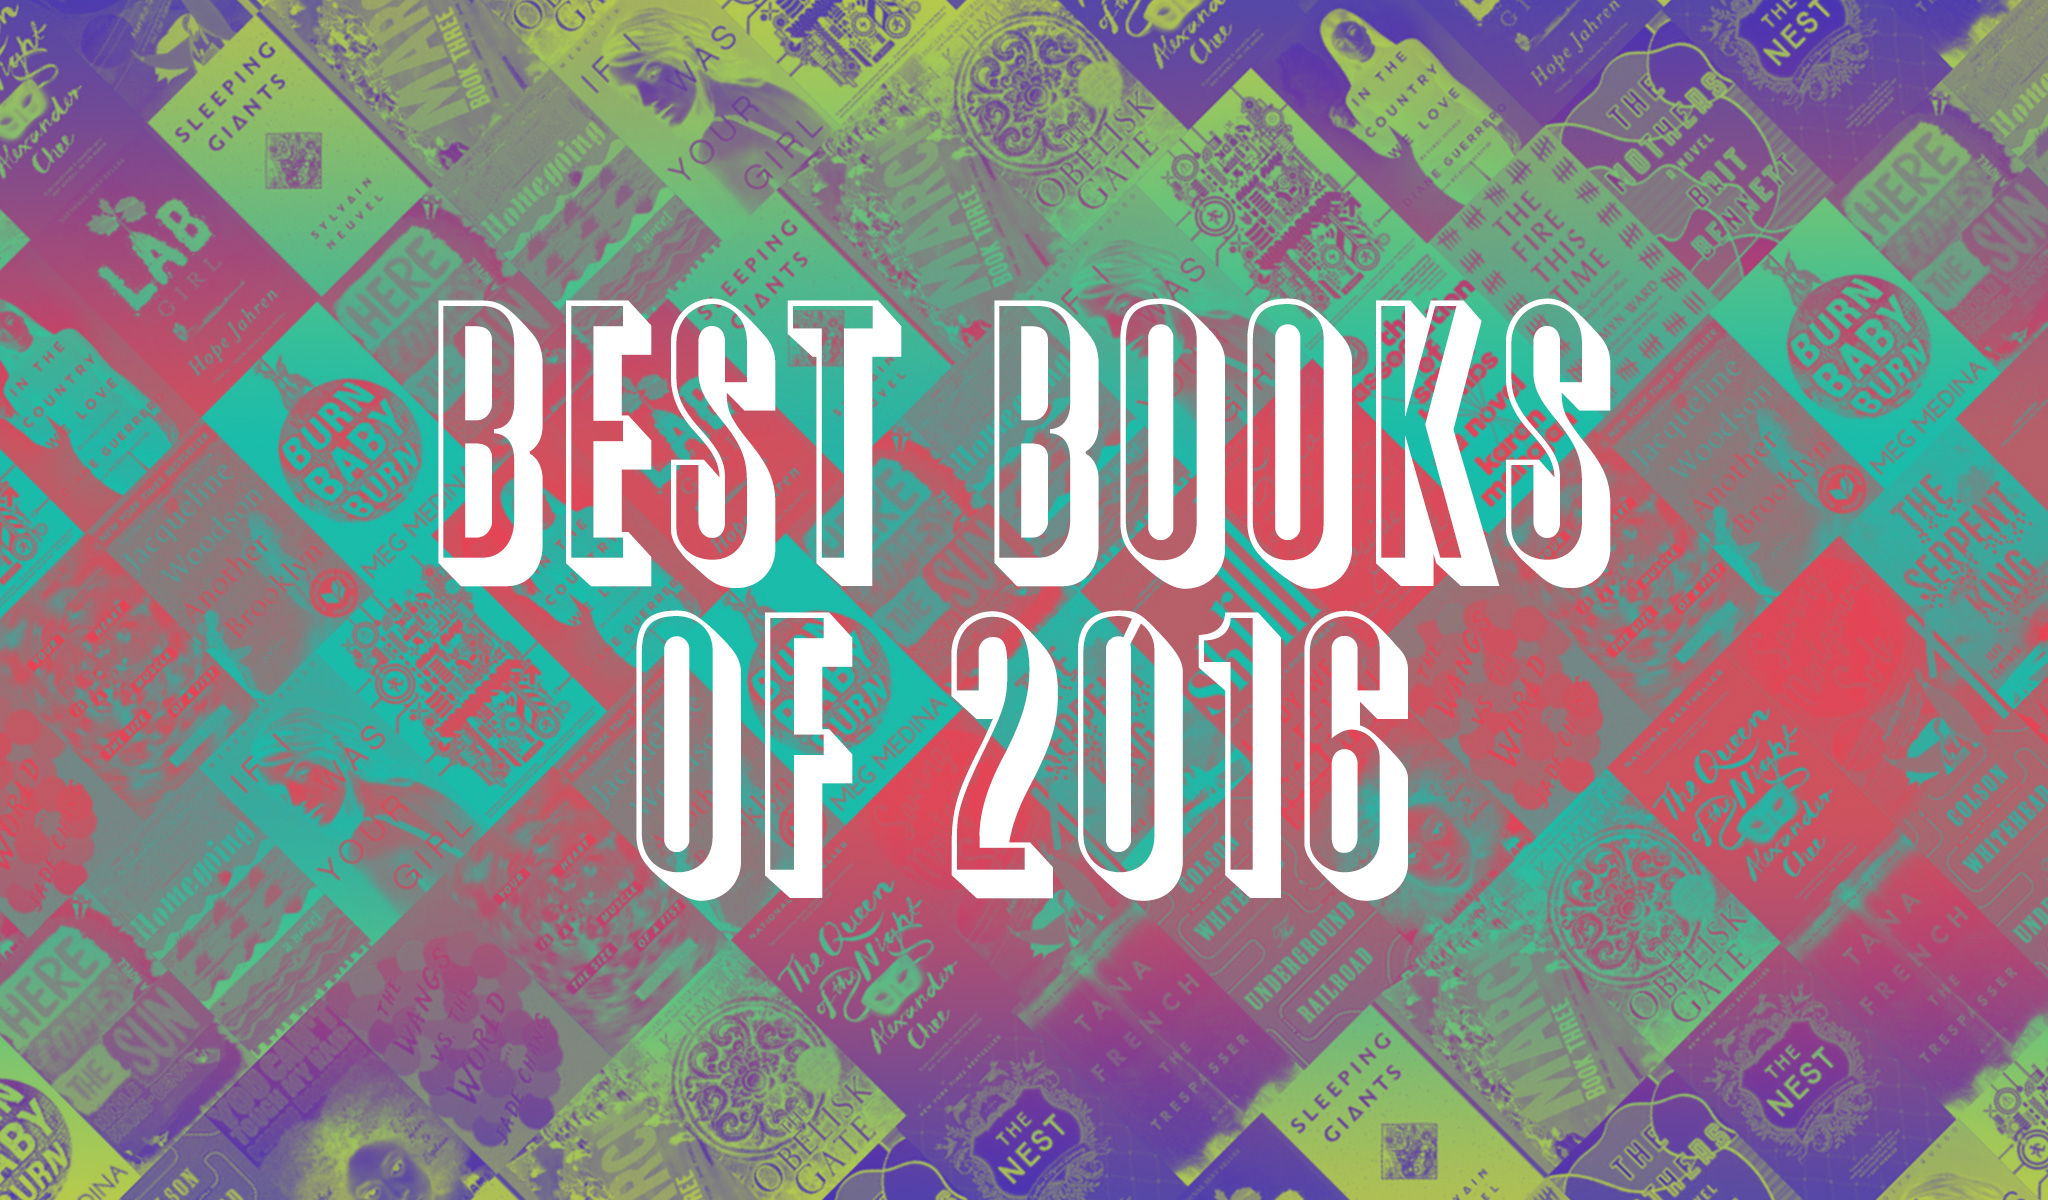 Book Riot's Best Books of 2016